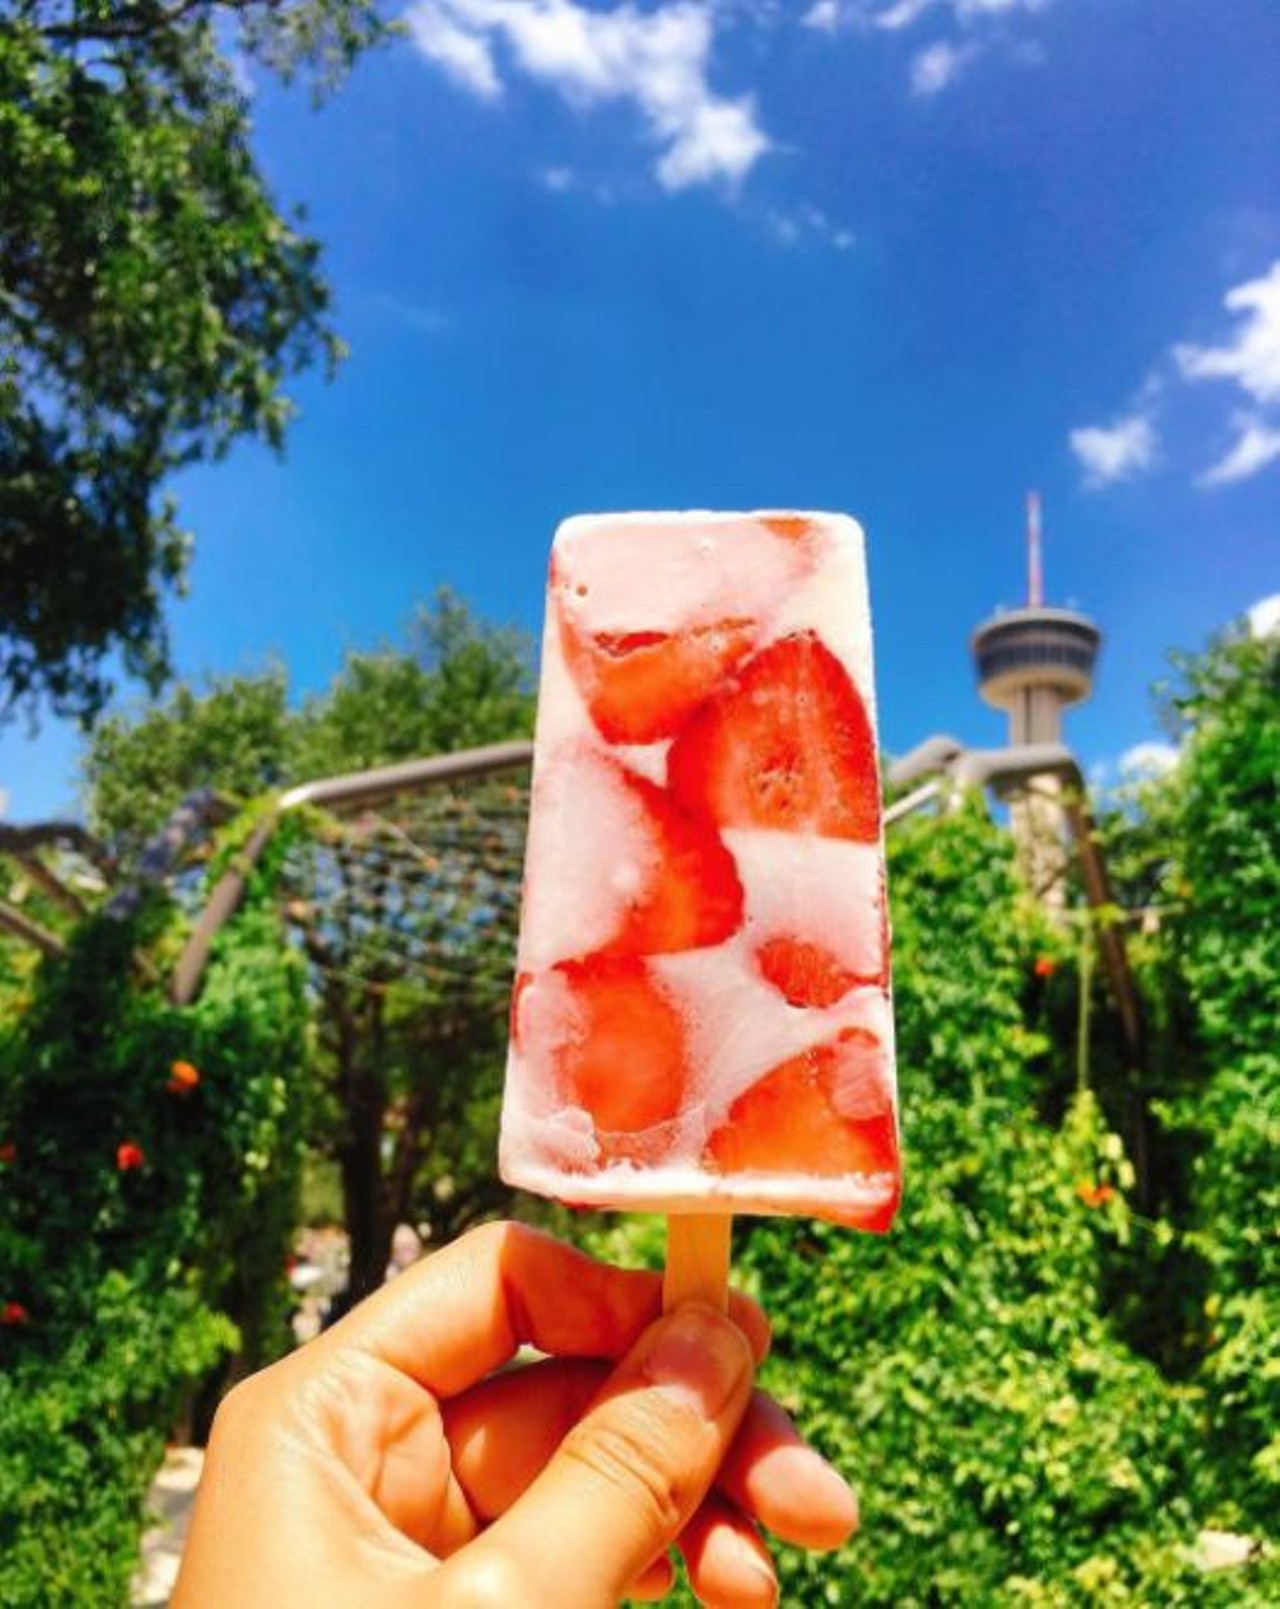 Snack on a paleta
If paletas aren't a staple in your diet during the summer, then you're doing it wrong.  Keep cool with a sweet and refreshing treat and make your way through San Antonio's long list of spots to grab a paleta. 
Photo via Instagram, crystalgonzales